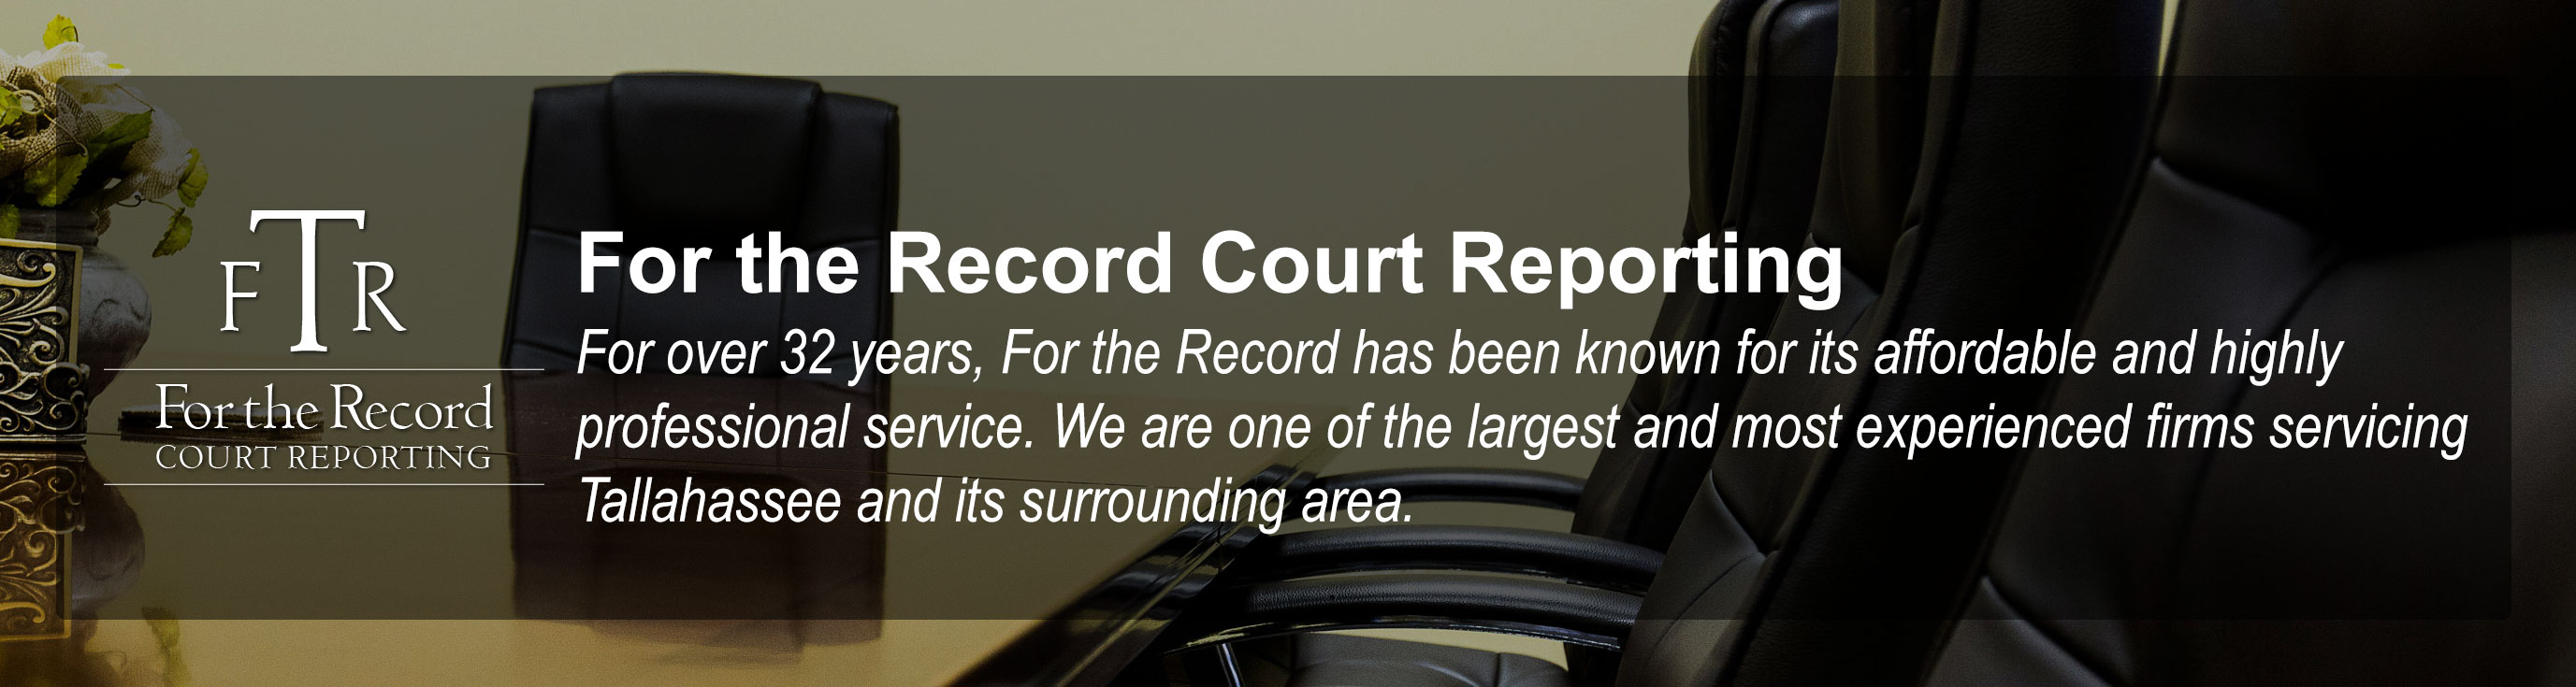 For the Record Court Reporting, Inc. in Tallahassee, Florida